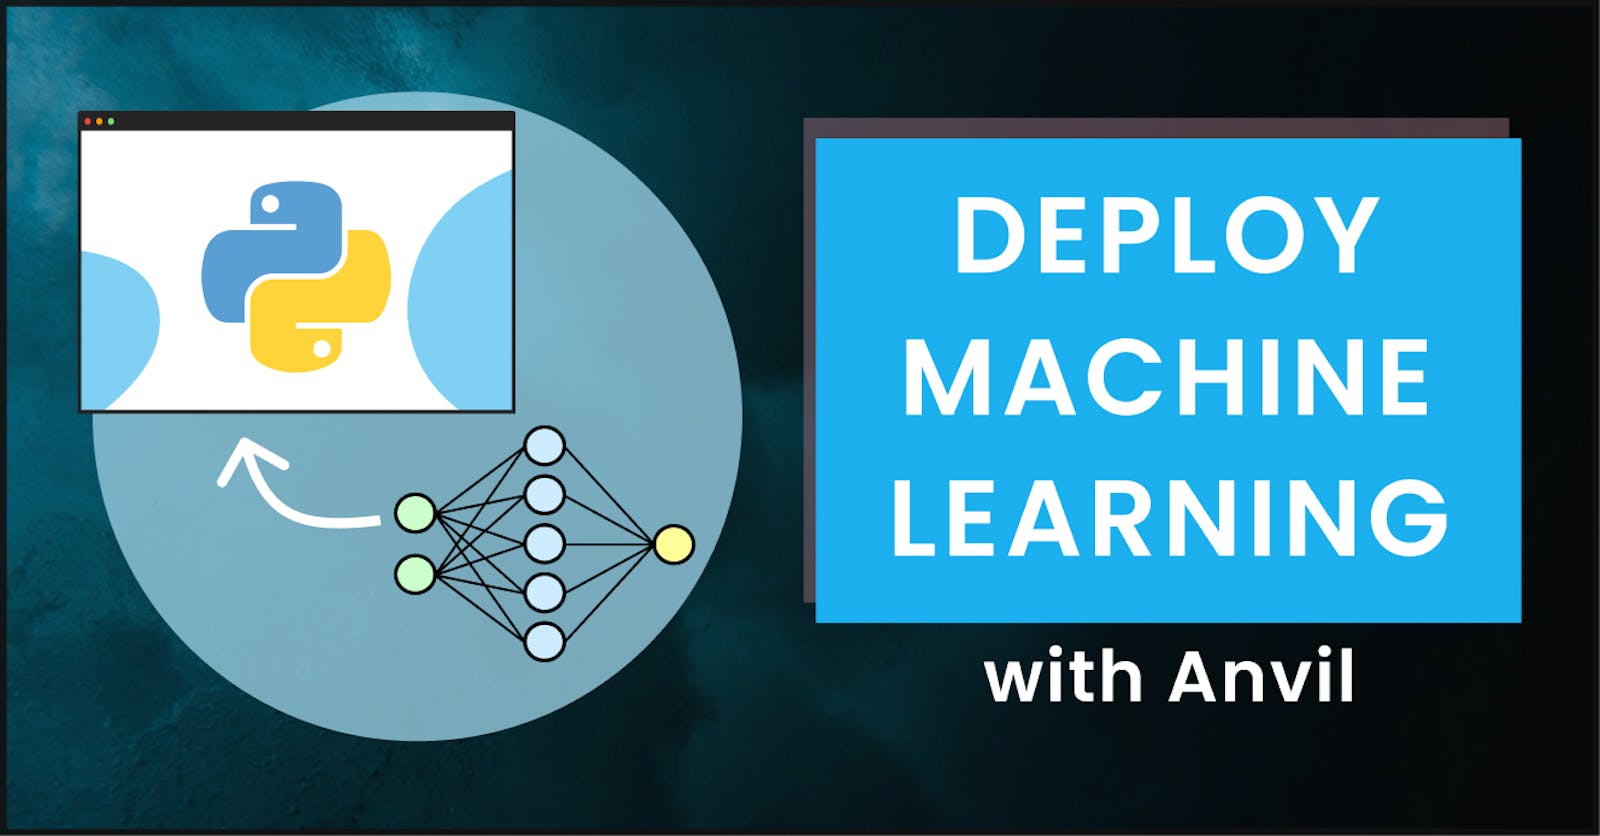 This is how to deploy a machine learning model with Anvil